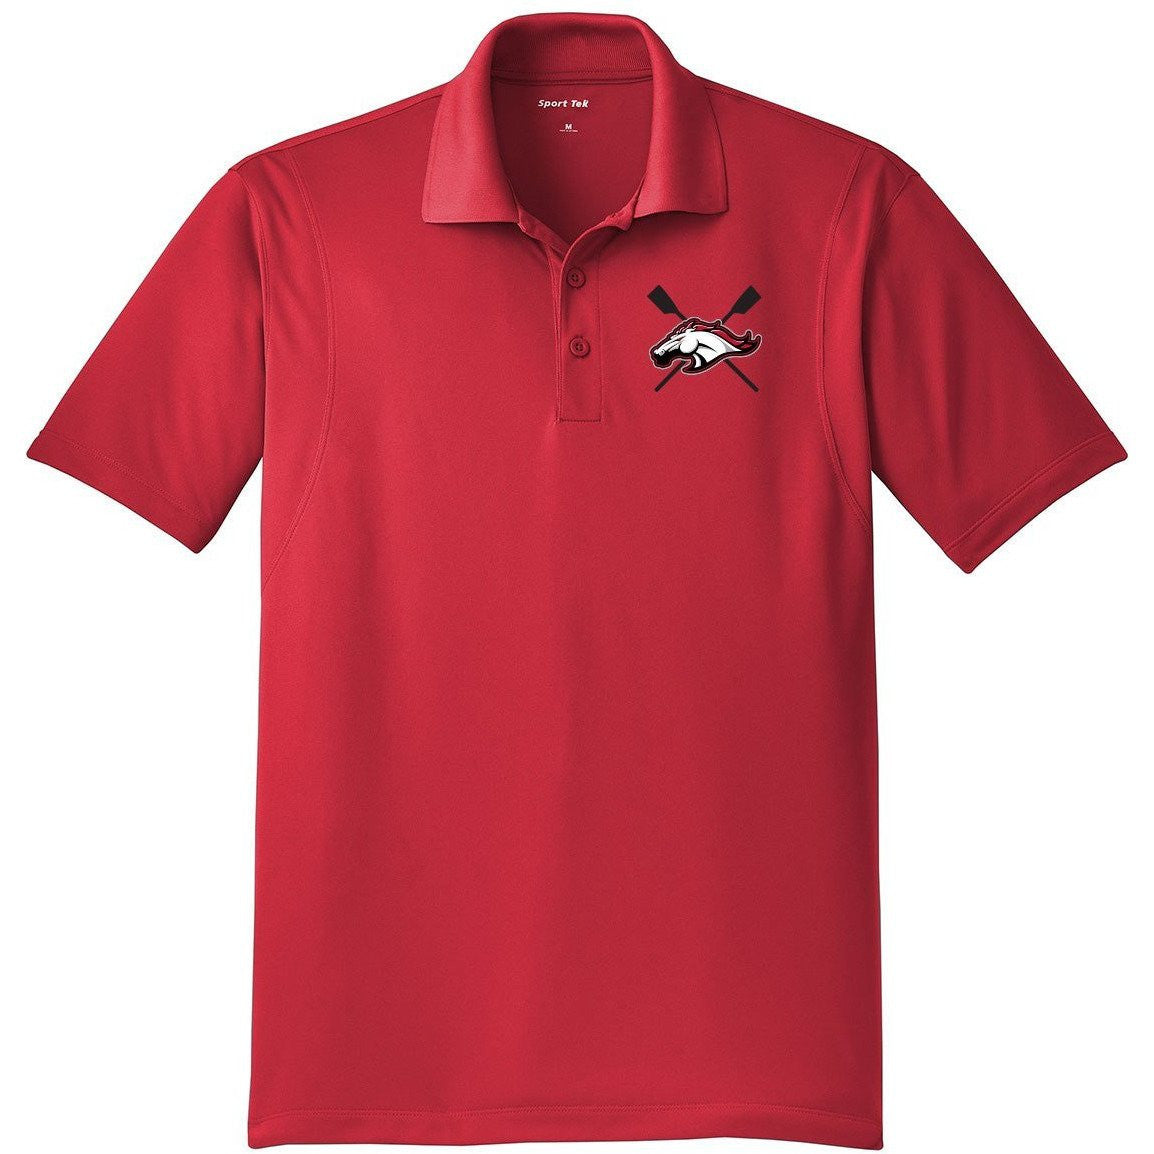 Brophy Crew Embroidered Performance Men's Polo